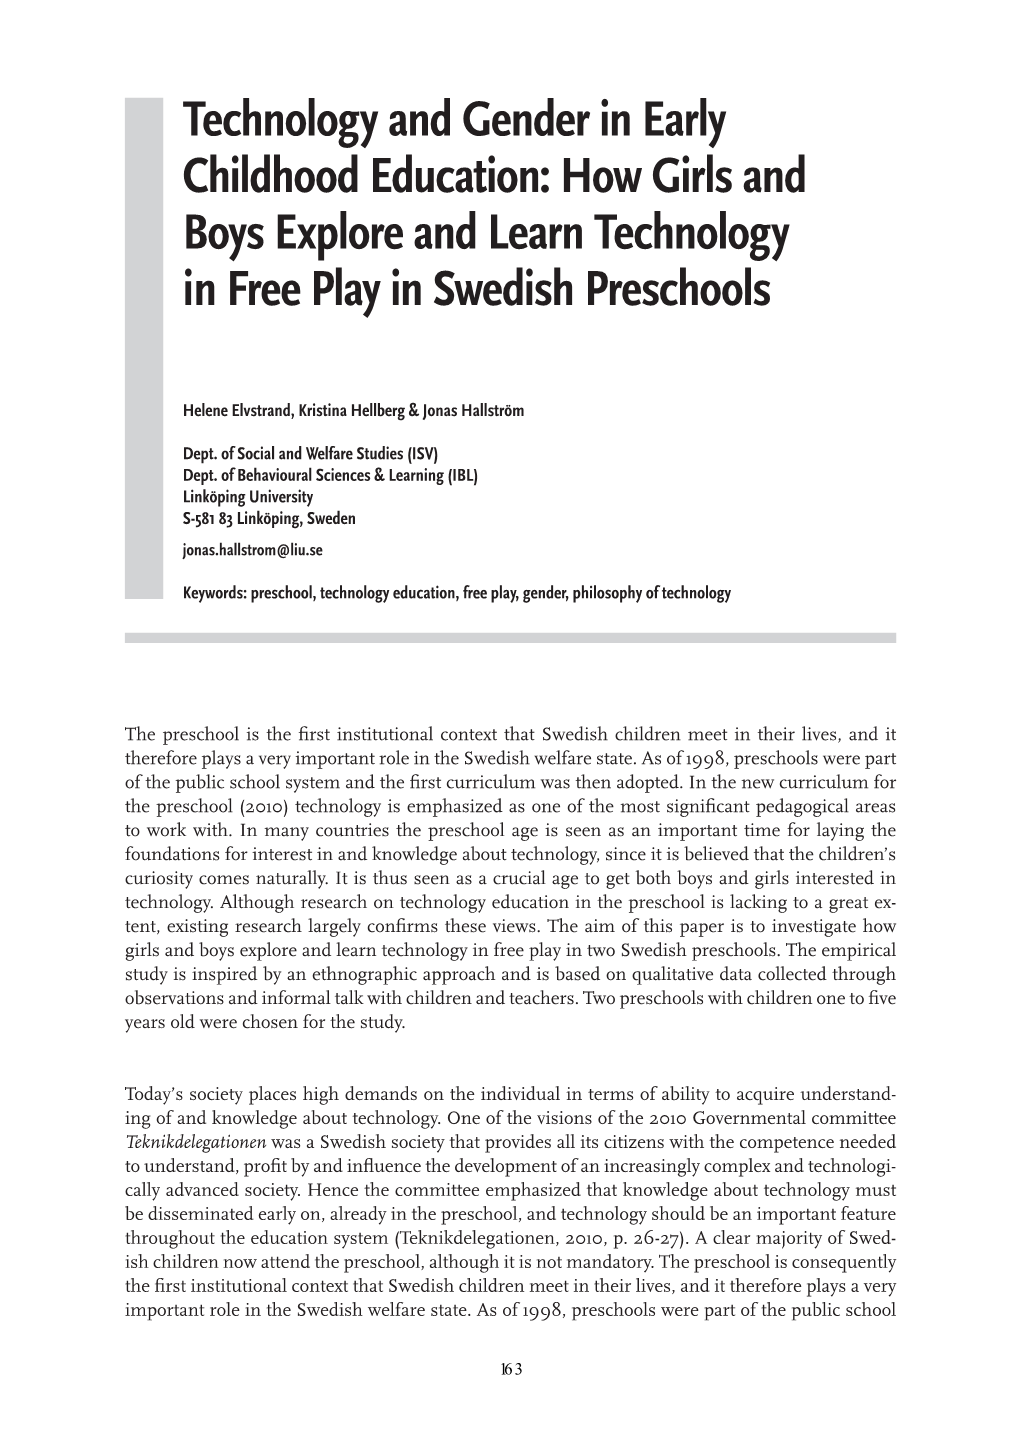 Technology and Gender in Early Childhood Education: How Girls and Boys Explore and Learn Technology in Free Play in Swedish Preschools